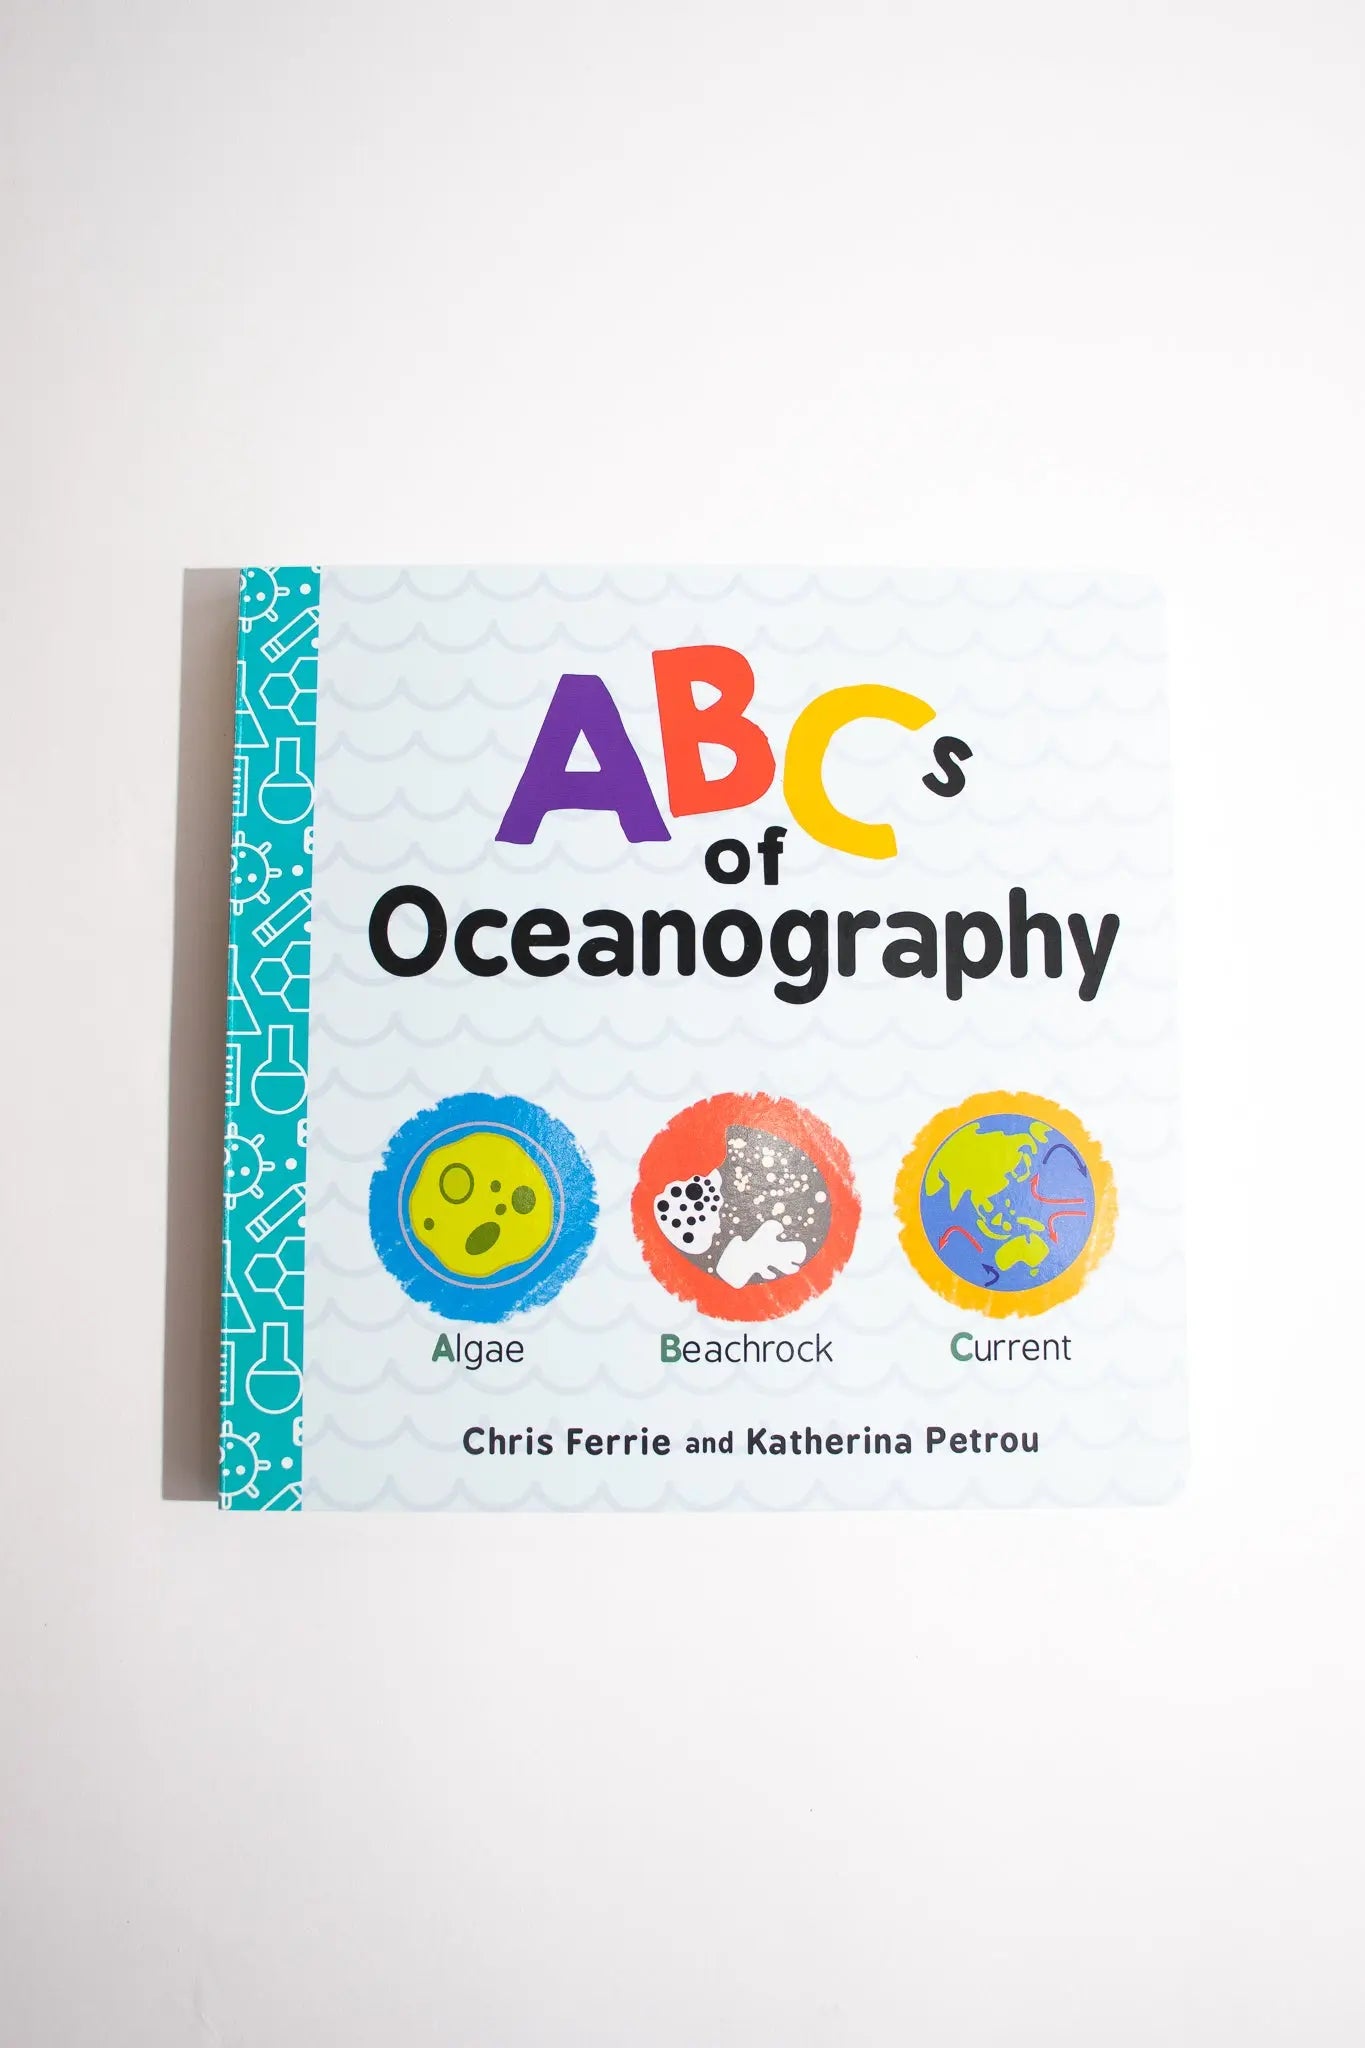 ABC's of Oceanography - Stemcell Science Shop